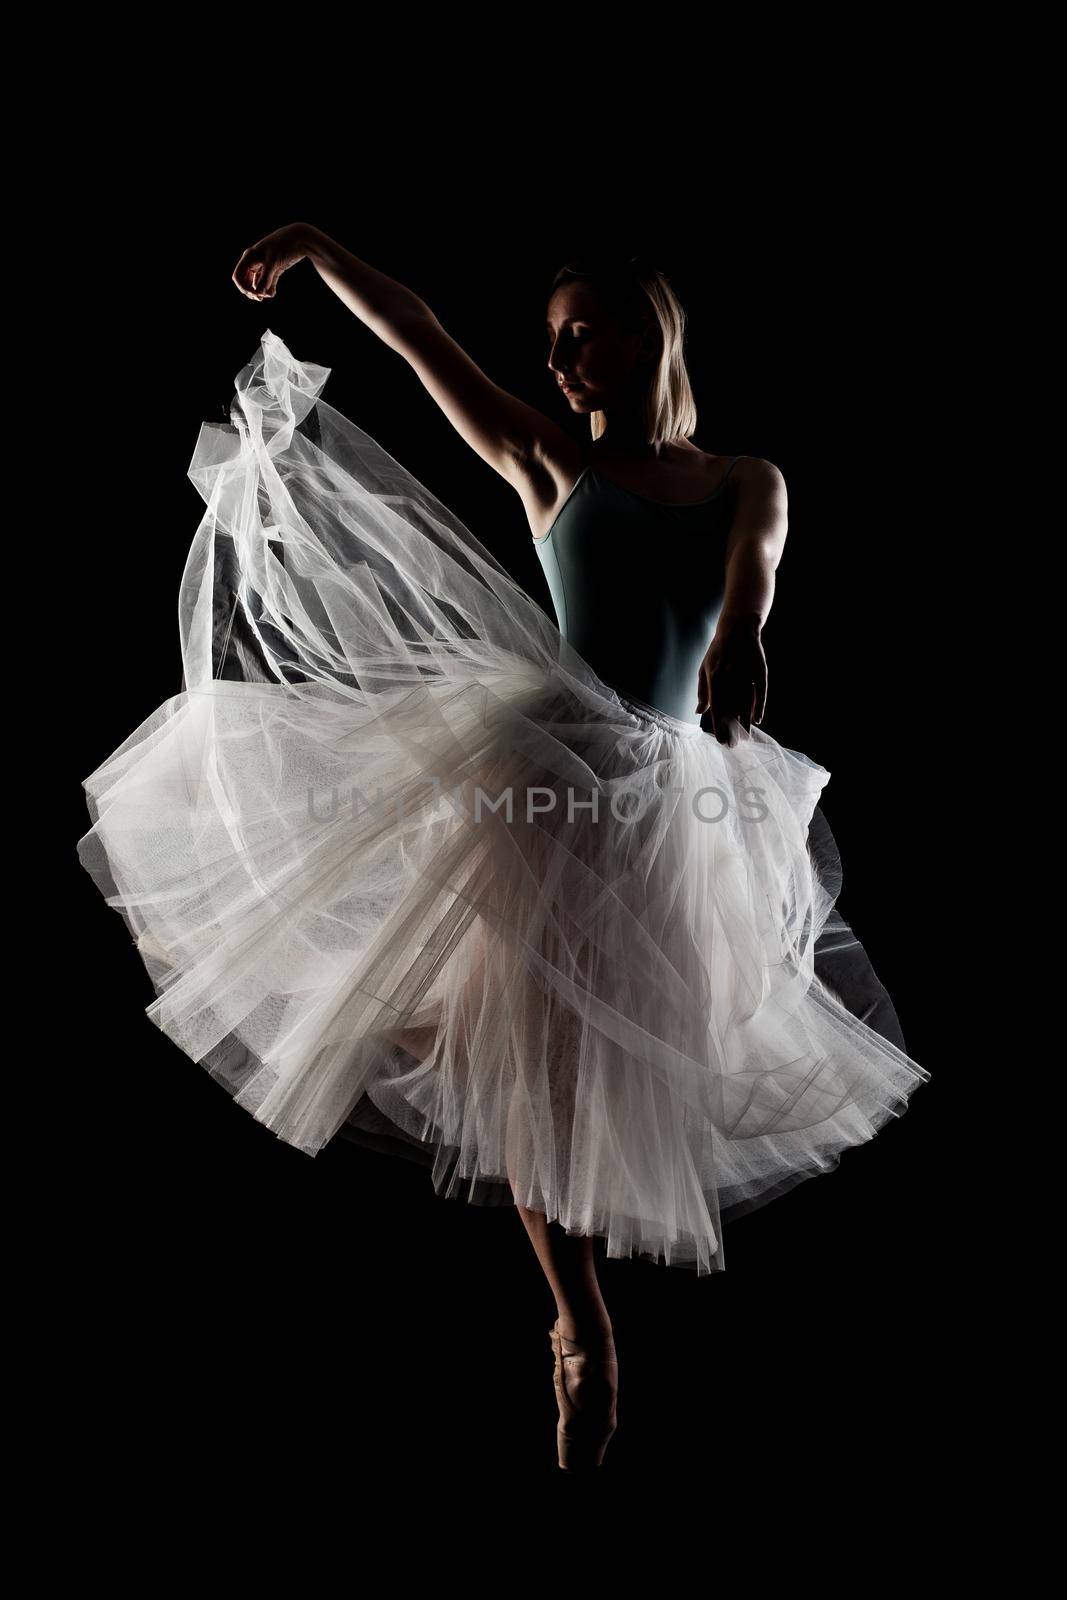 ballerina with a white dress and black top posing on black background by kokimk